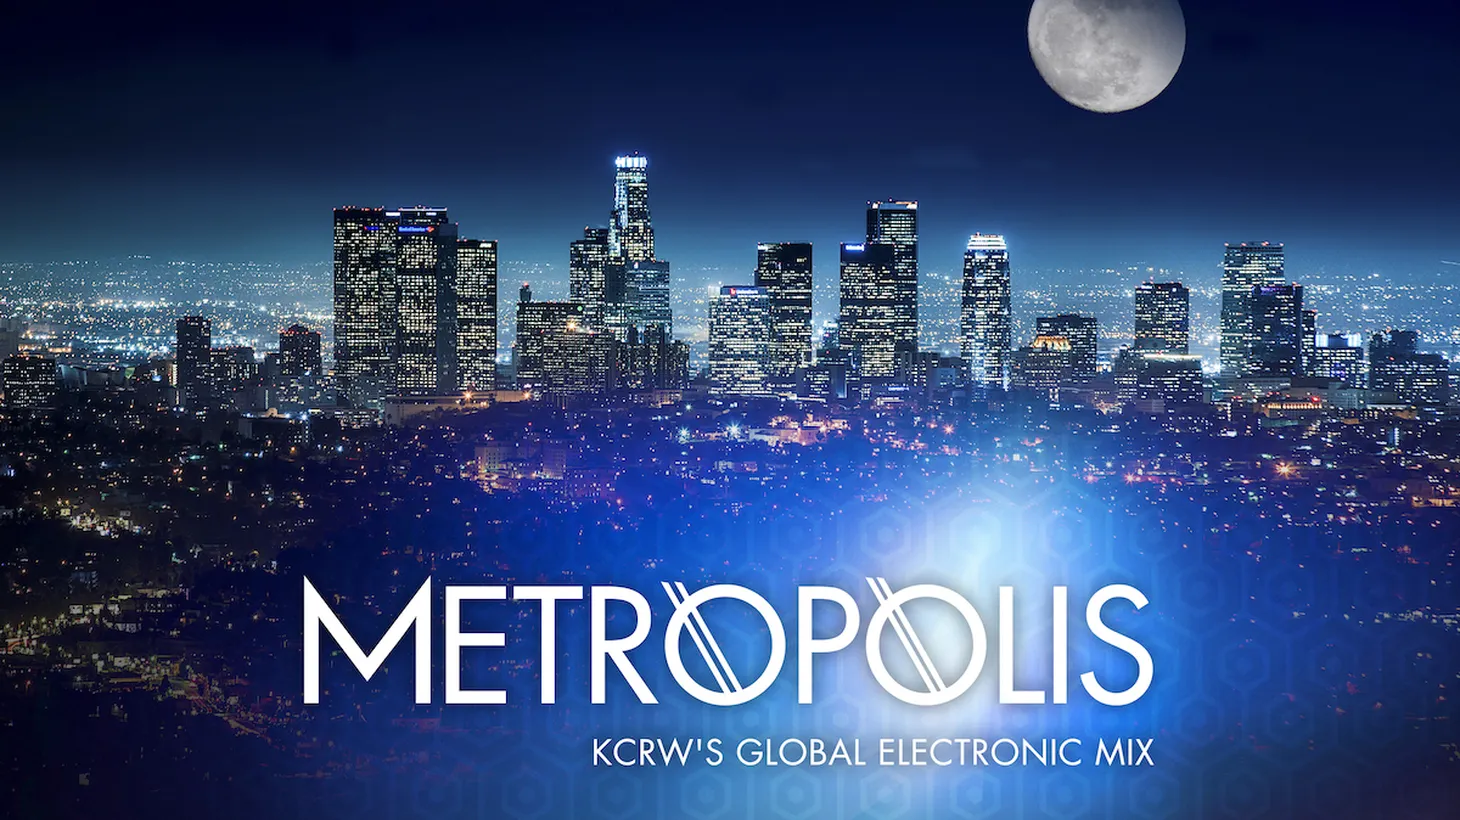 This special edition of Metropolis is a 2 hour sampling of our KCRWmusic.com stream.